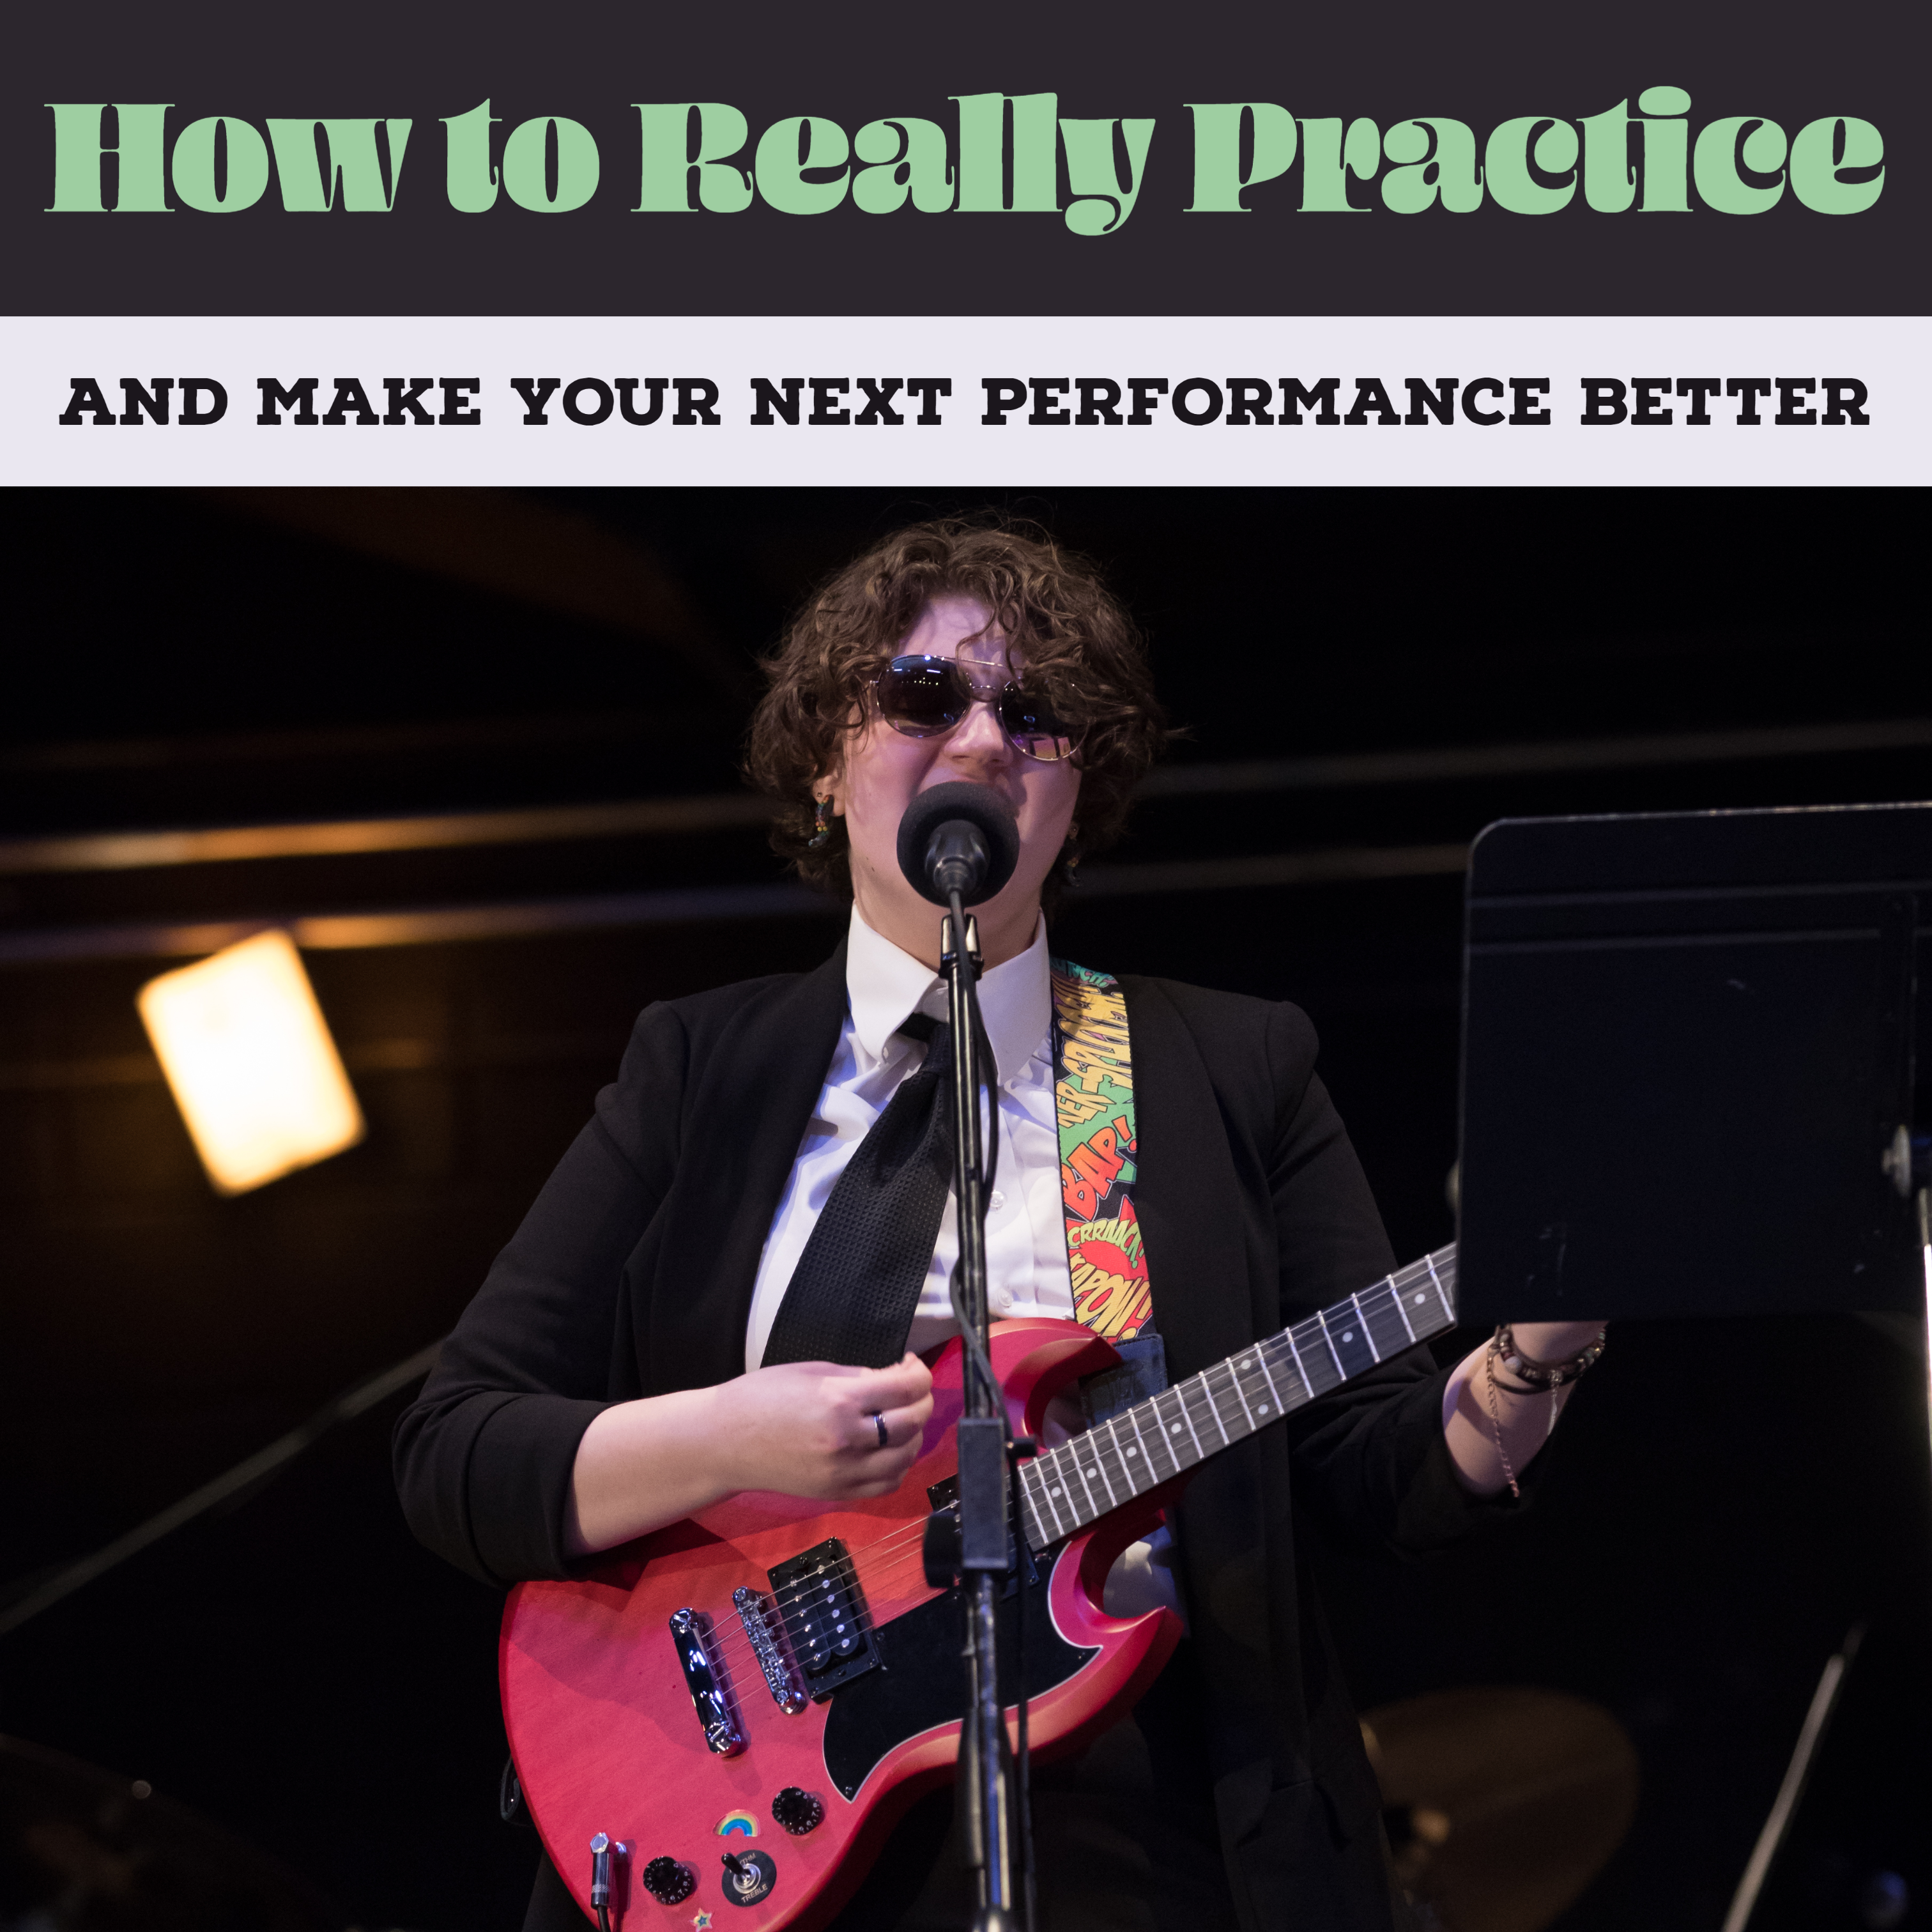 Practice Tips for Performance